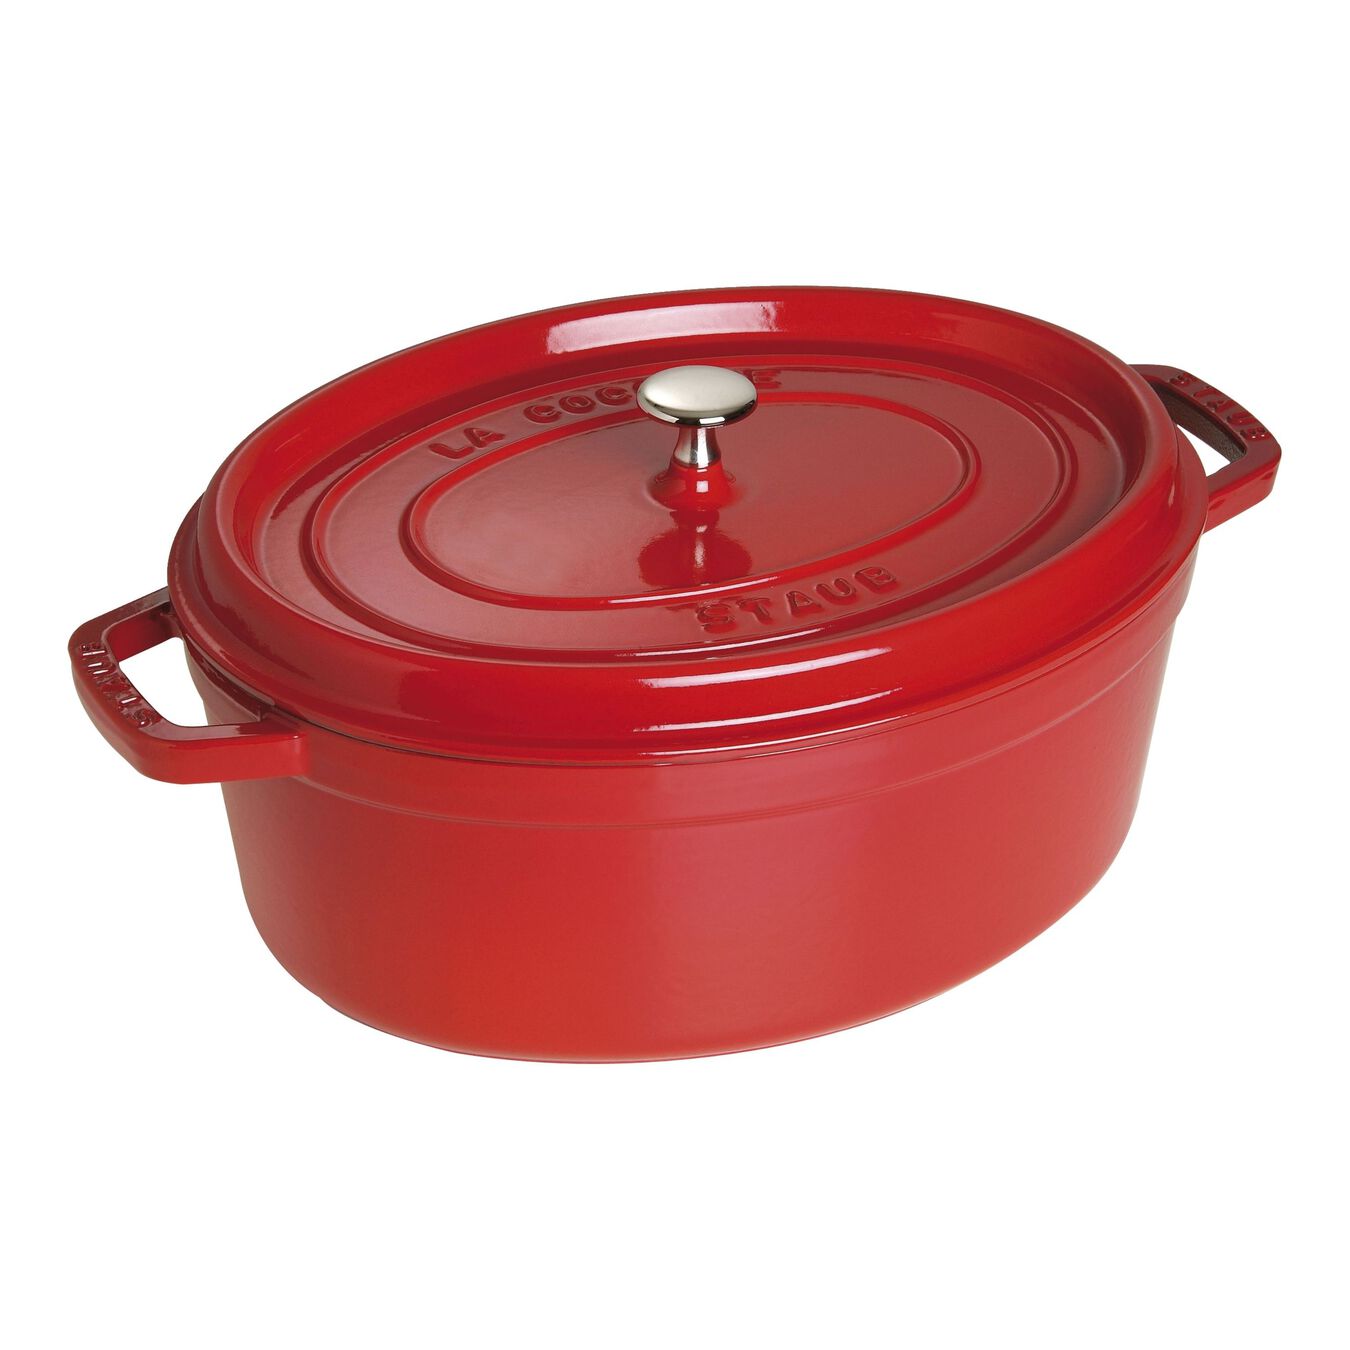 5.5 l cast iron oval Cocotte, cherry - Visual Imperfections,,large 1